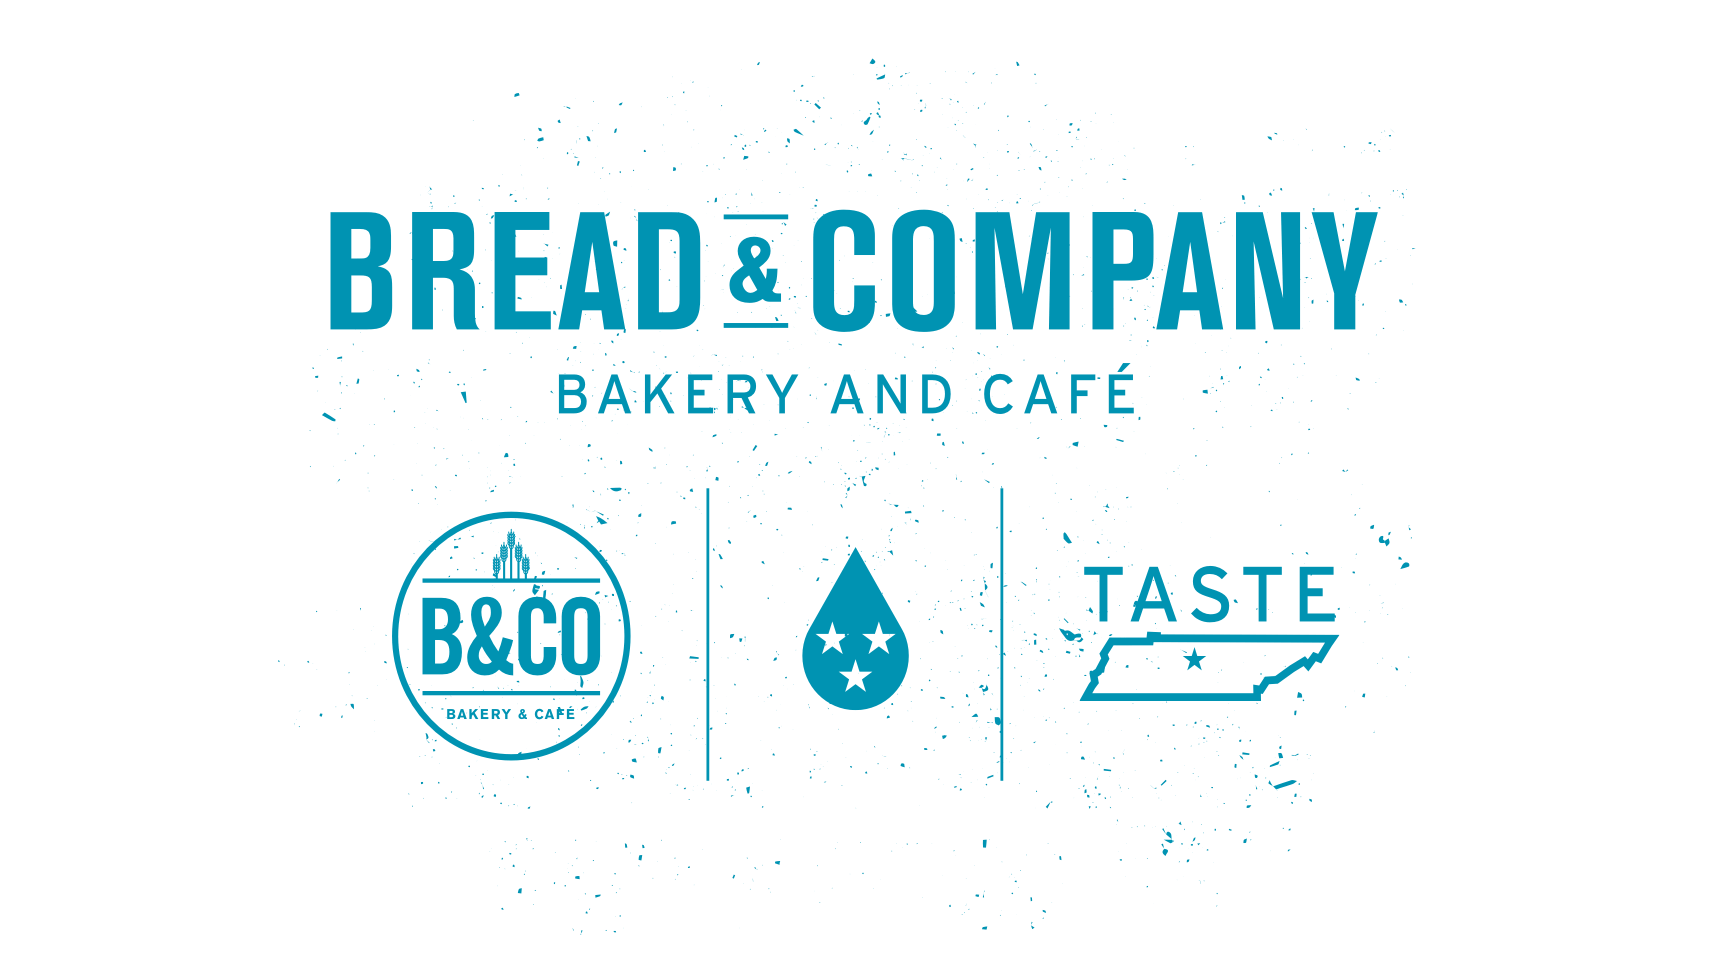 Horizontal logo, circular penny logo, Tennessee tea drop, taste Tennessee branding elements as part of visual identity system for Bread & Company in Nashville, Tennessee